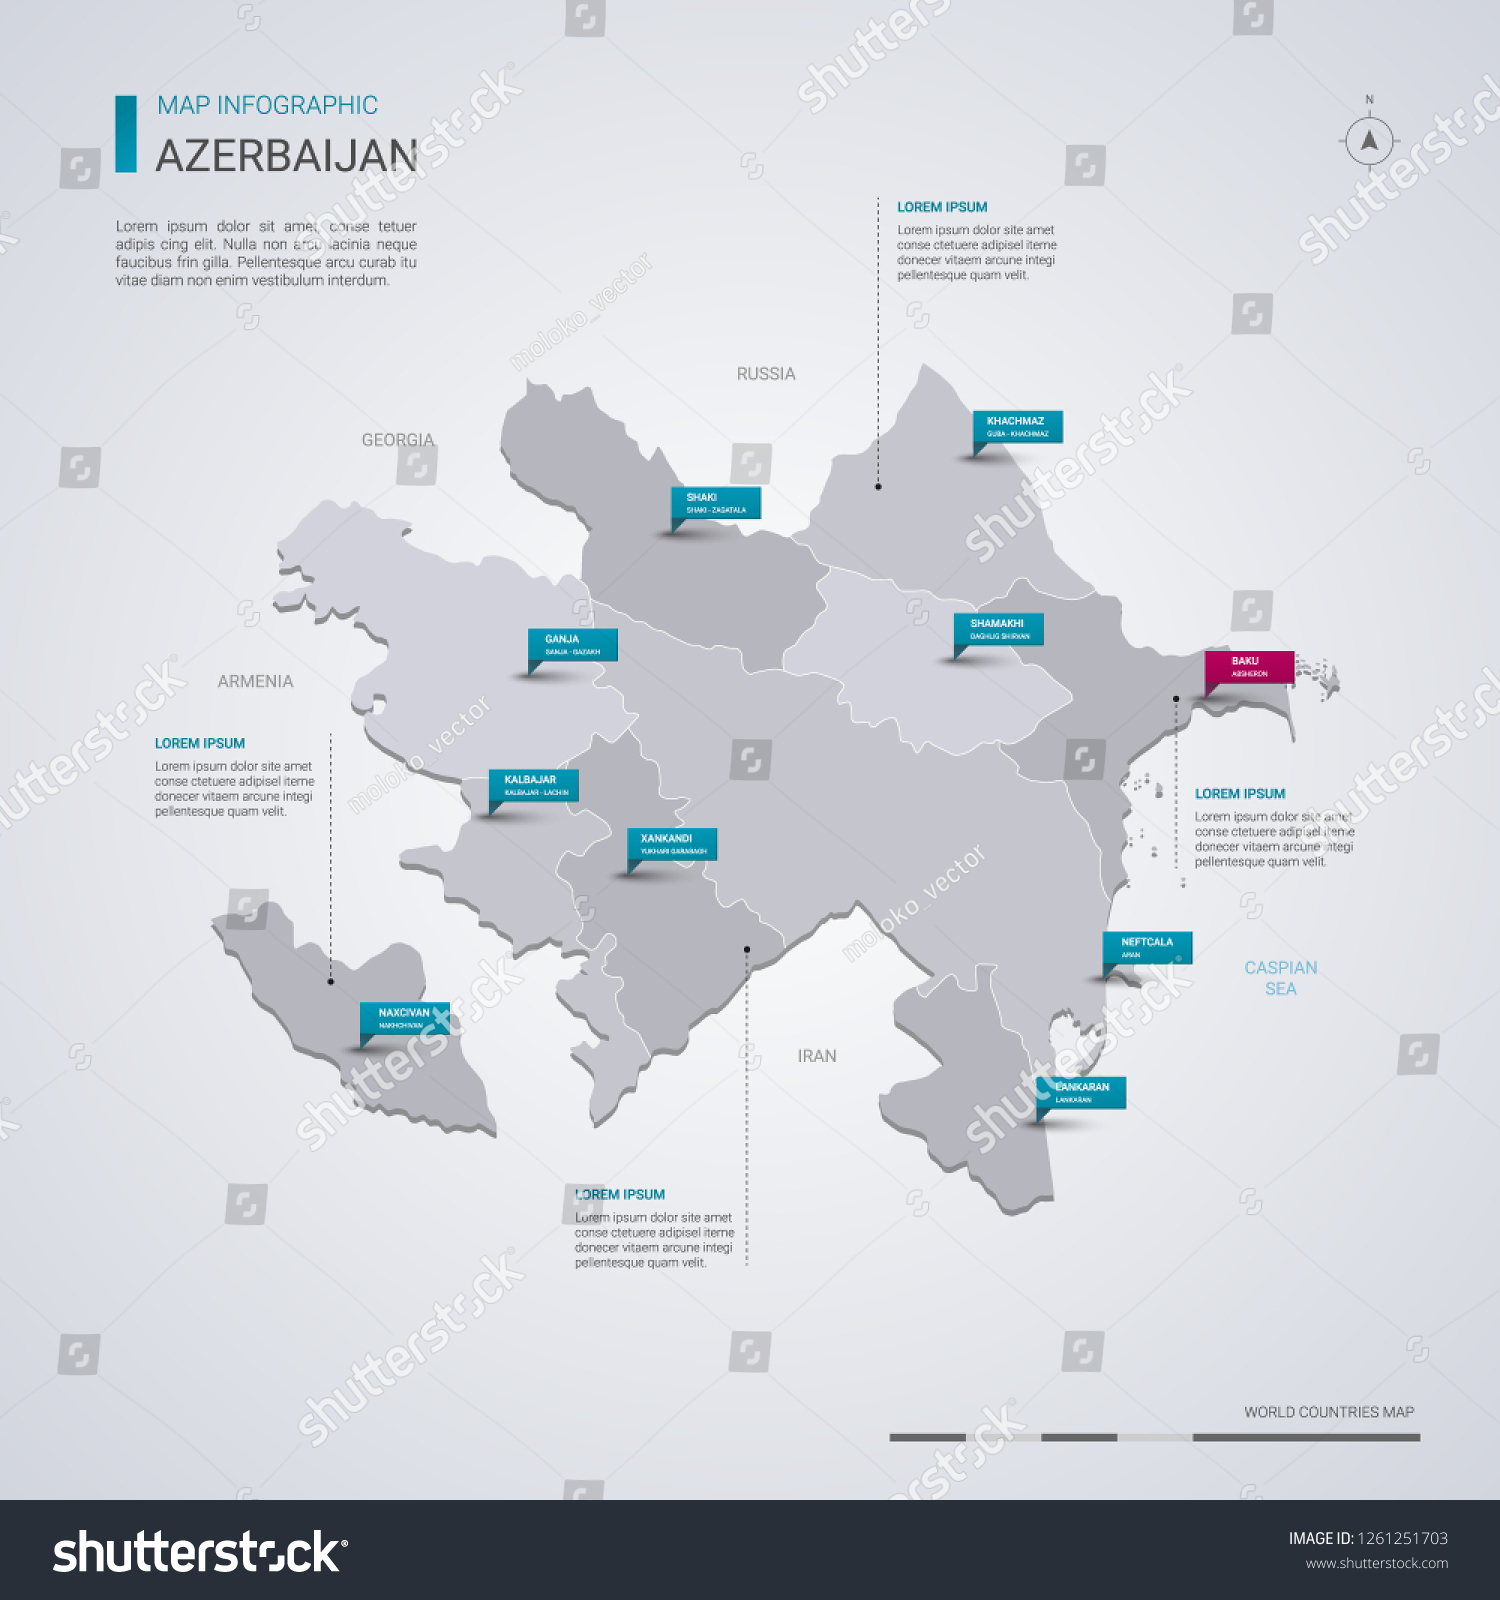 SVG of Azerbaijan vector map with infographic elements, pointer marks. Editable template with regions, cities and capital Baku.  svg